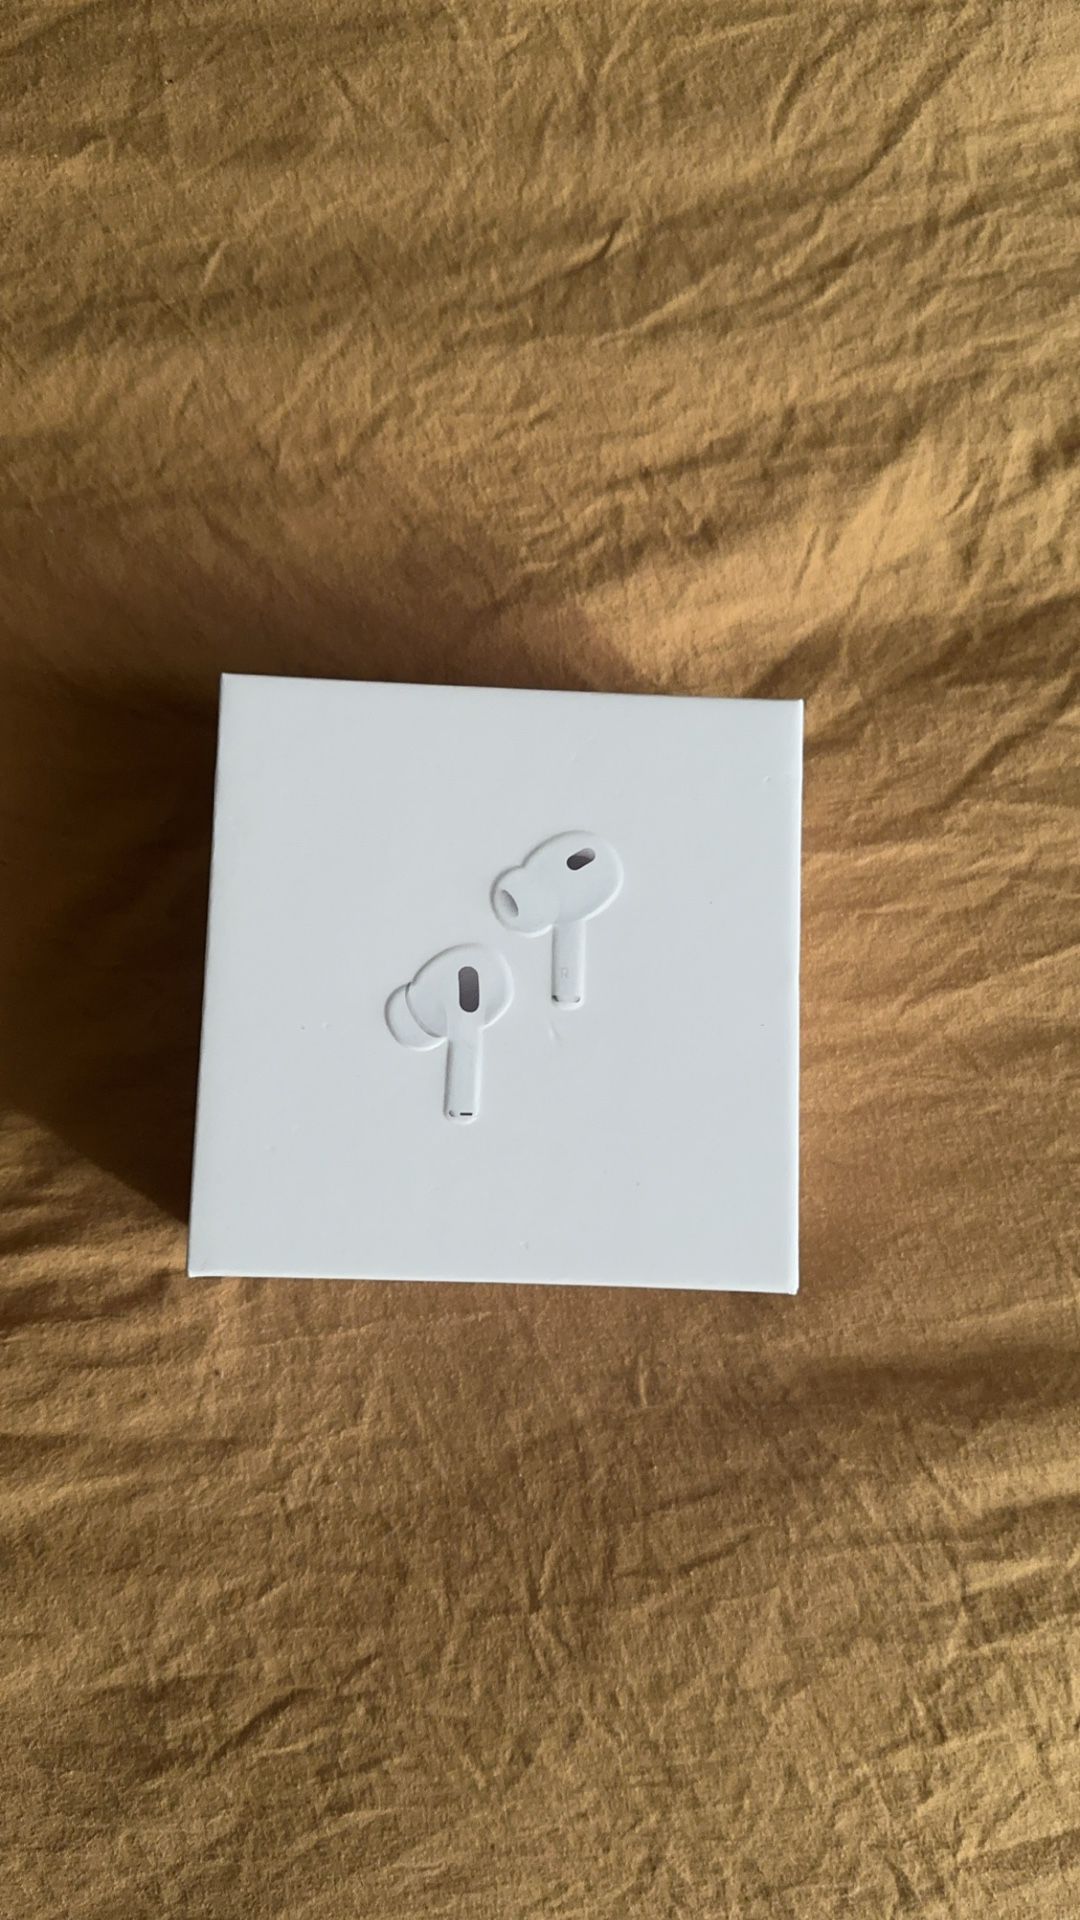 AirPods Pro Gen 2 With USB-C